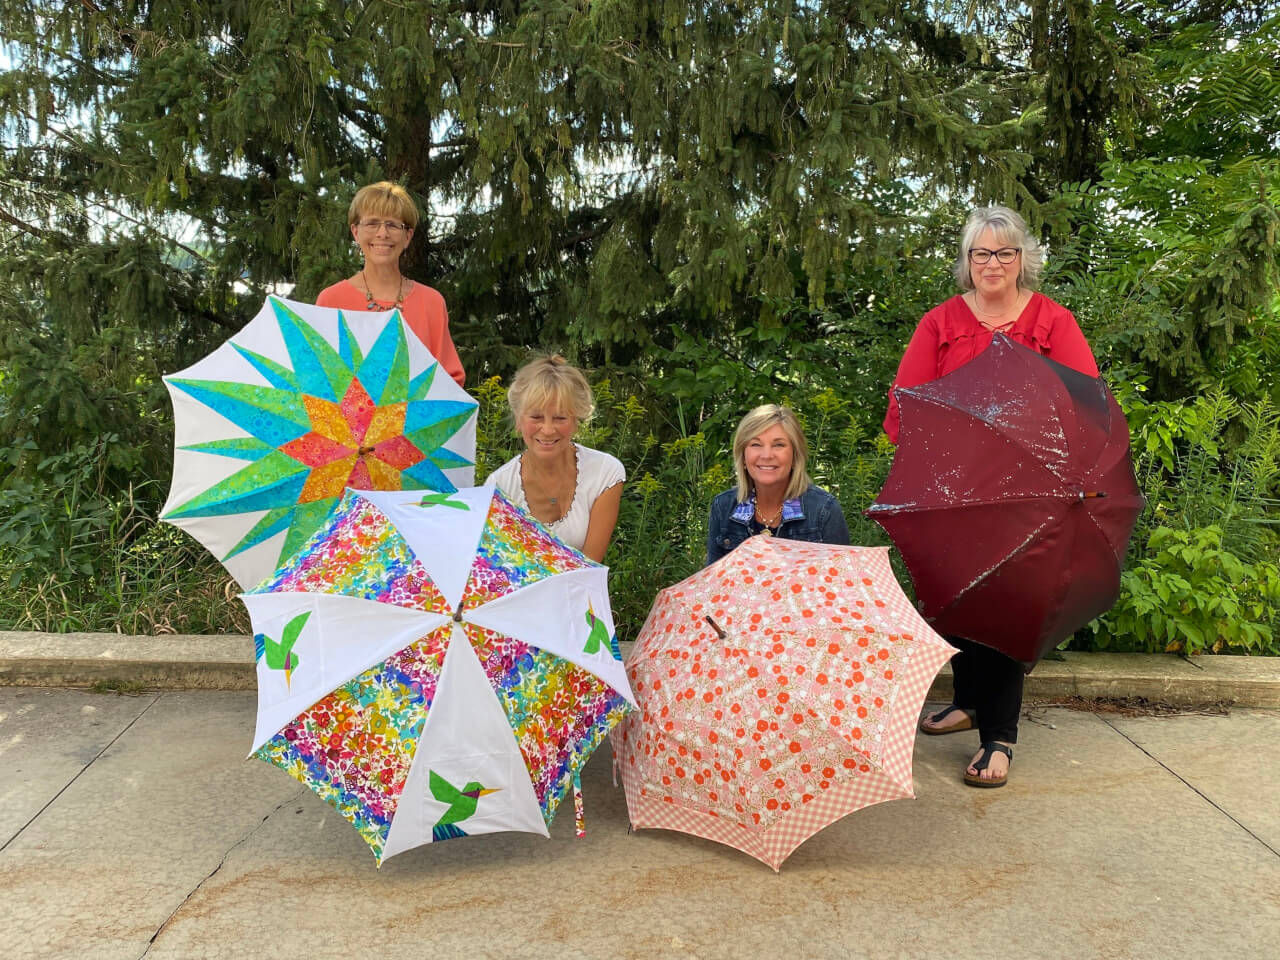 So you want to Make an Umbrella? Make your Own Umbrella, by Judy